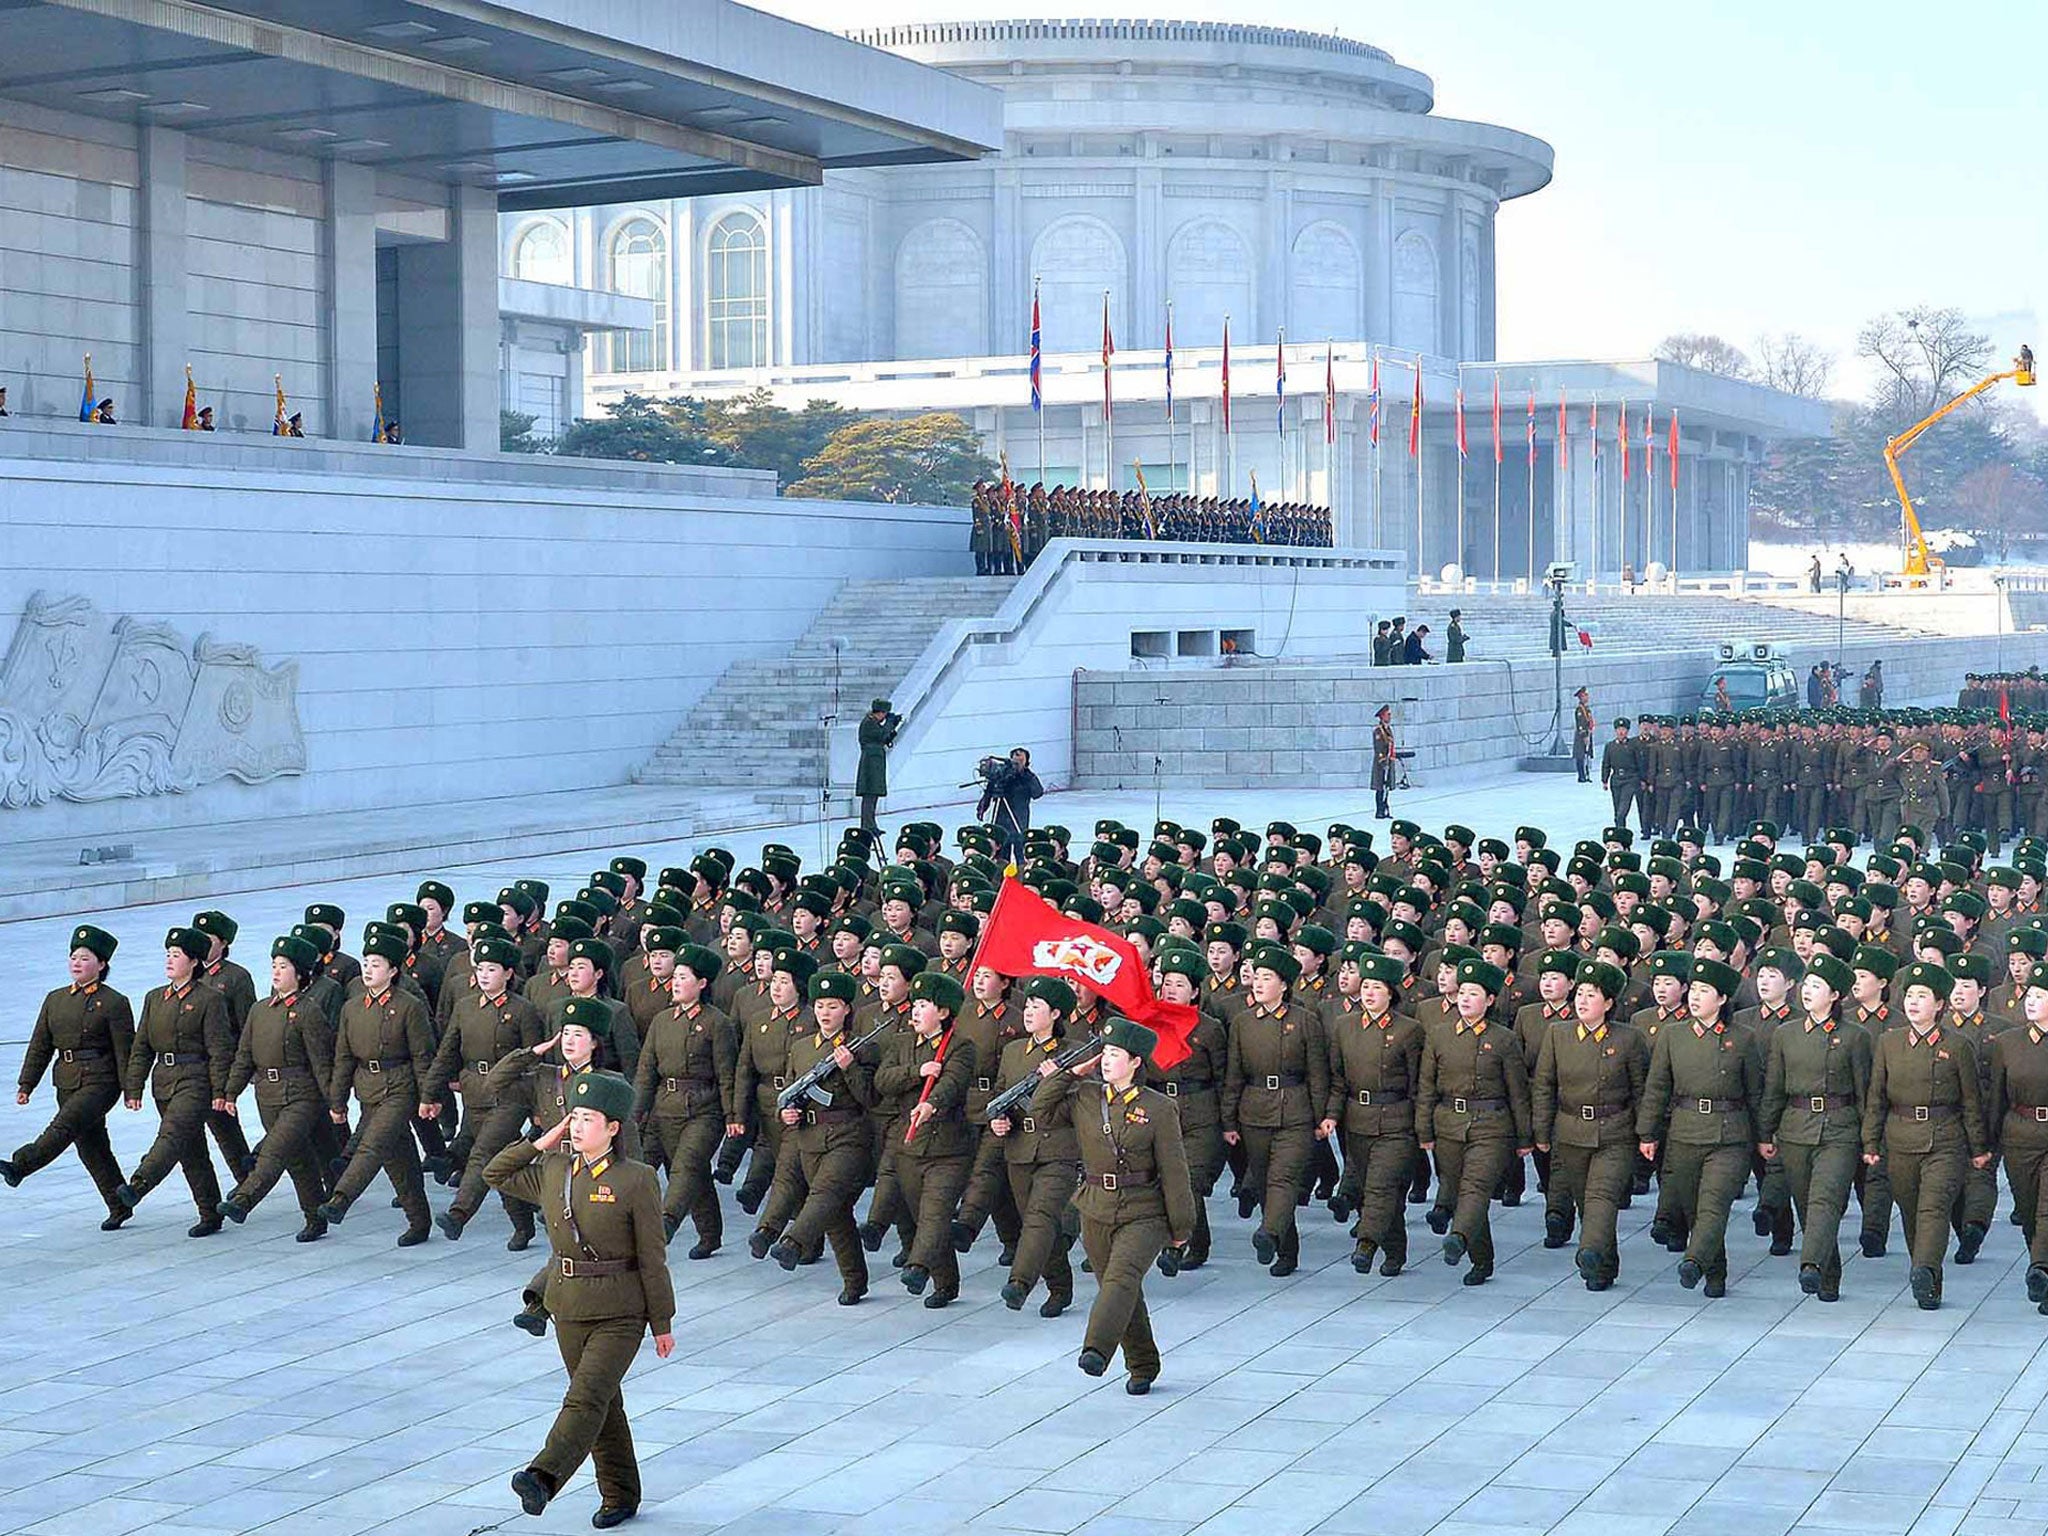 North Korean soldiers gathered at Kumsusan memorial palace in support of their leader Kim Jong-Un in Pyongyang